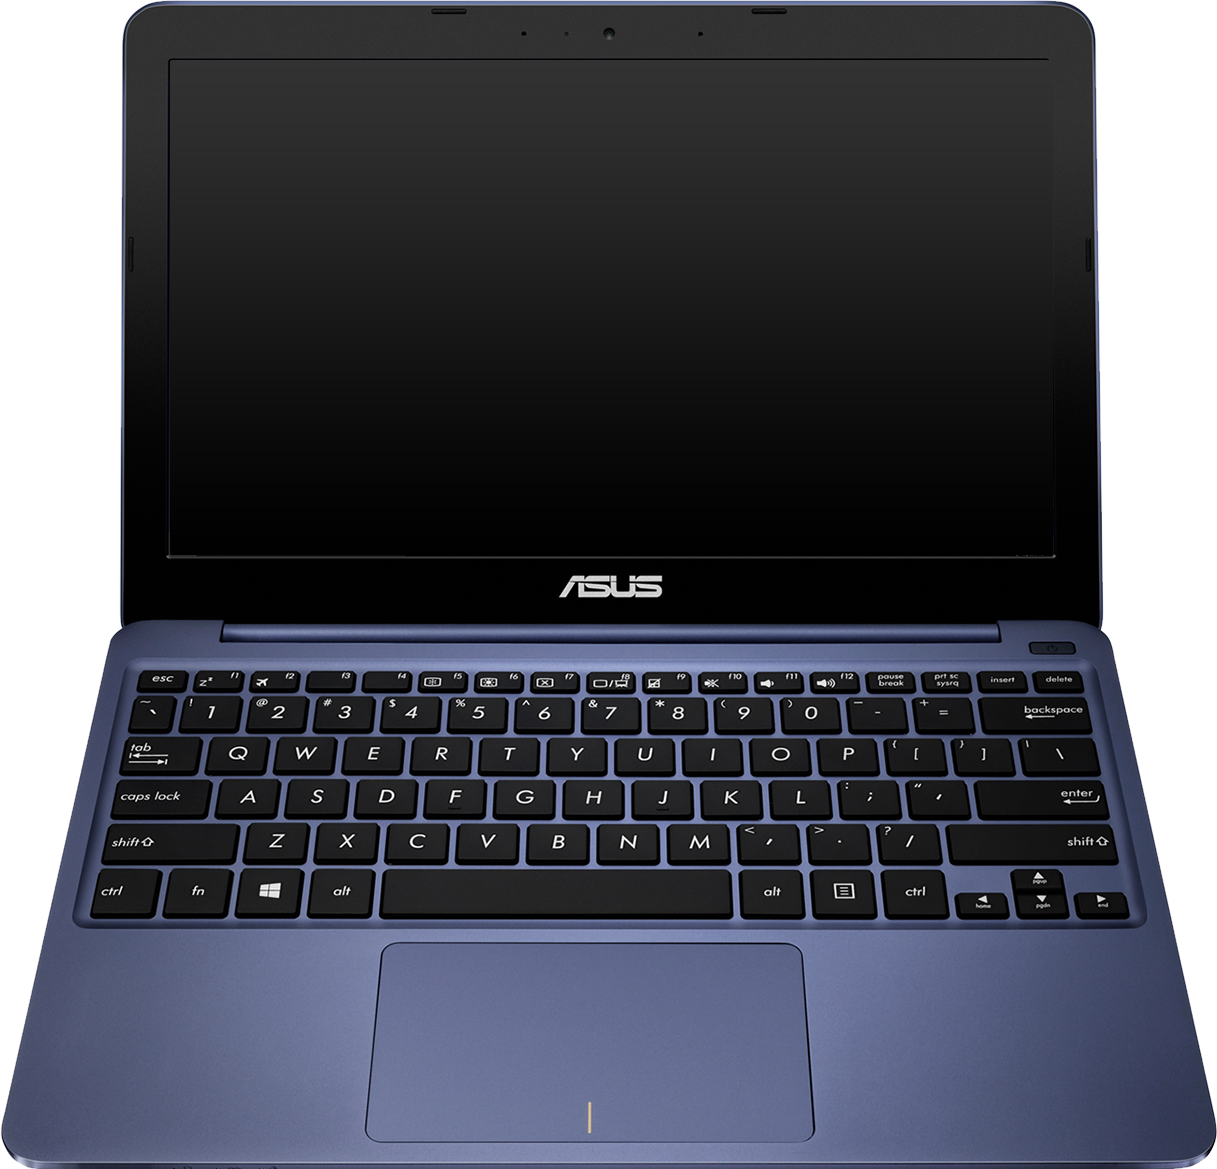 asus　E200h　notebook